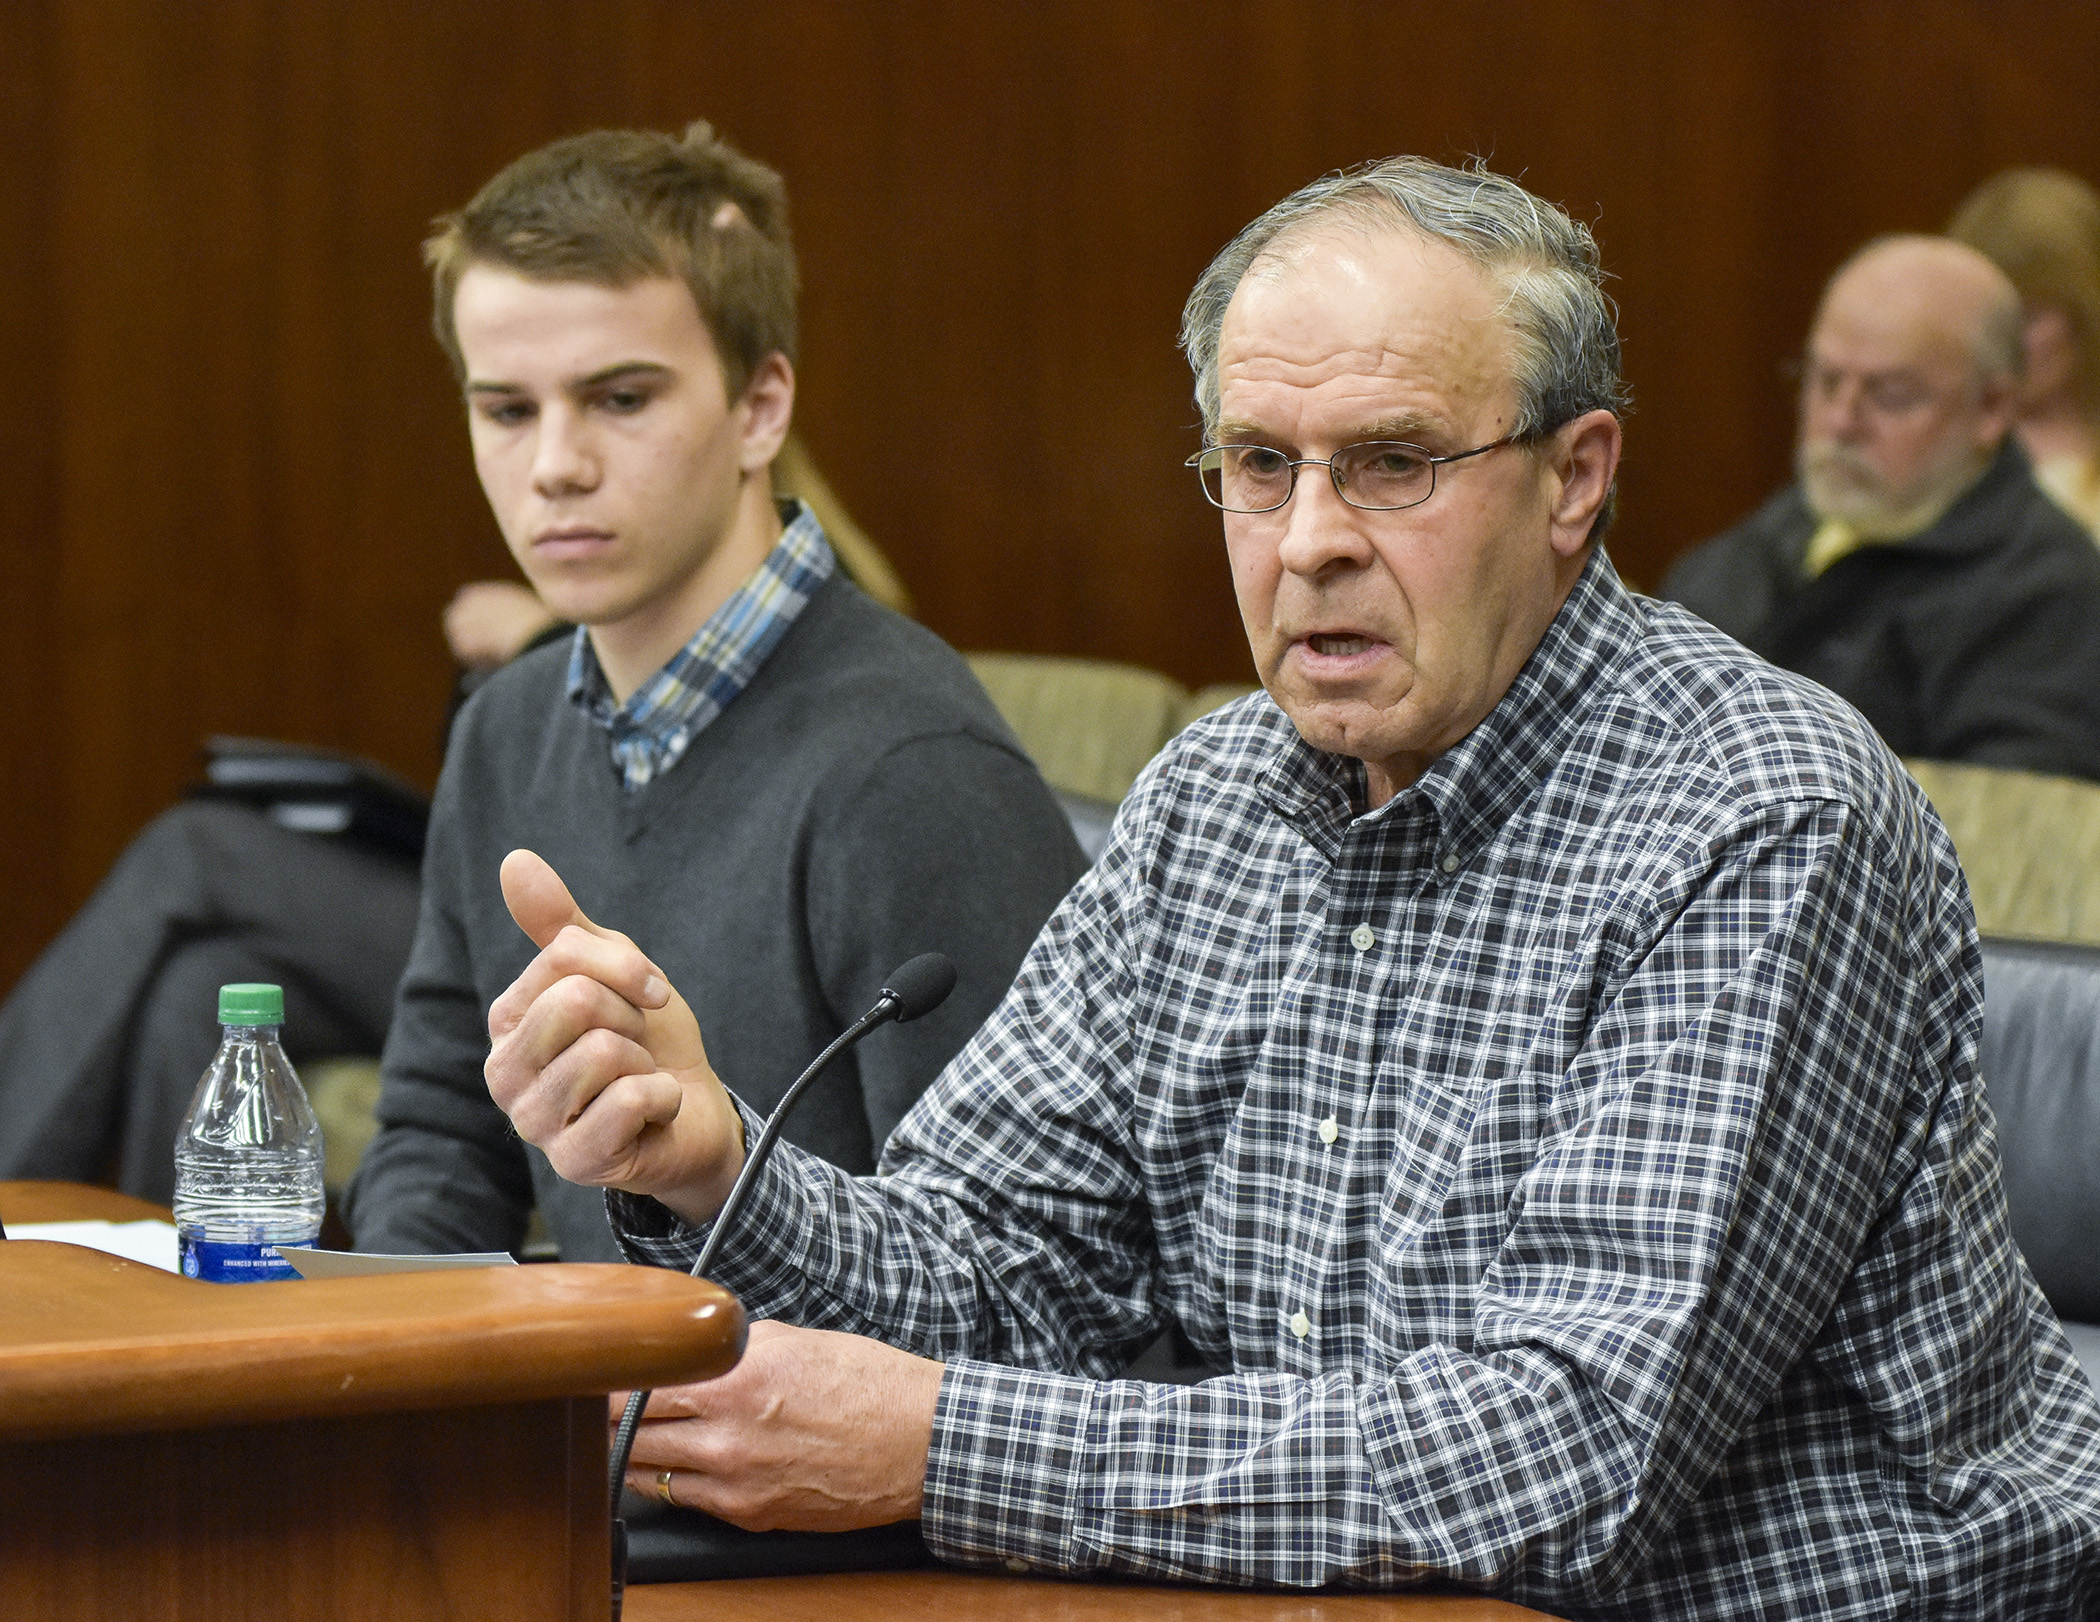 Pat O’Boyle, right, and his grandson, Max Rabidue, testify before the House Mining and Outdoor Recreation Policy Committee March 16 on HF3209, a bill that would prohibit adoption of rules limiting use of lead shot. Photo by Andrew VonBank